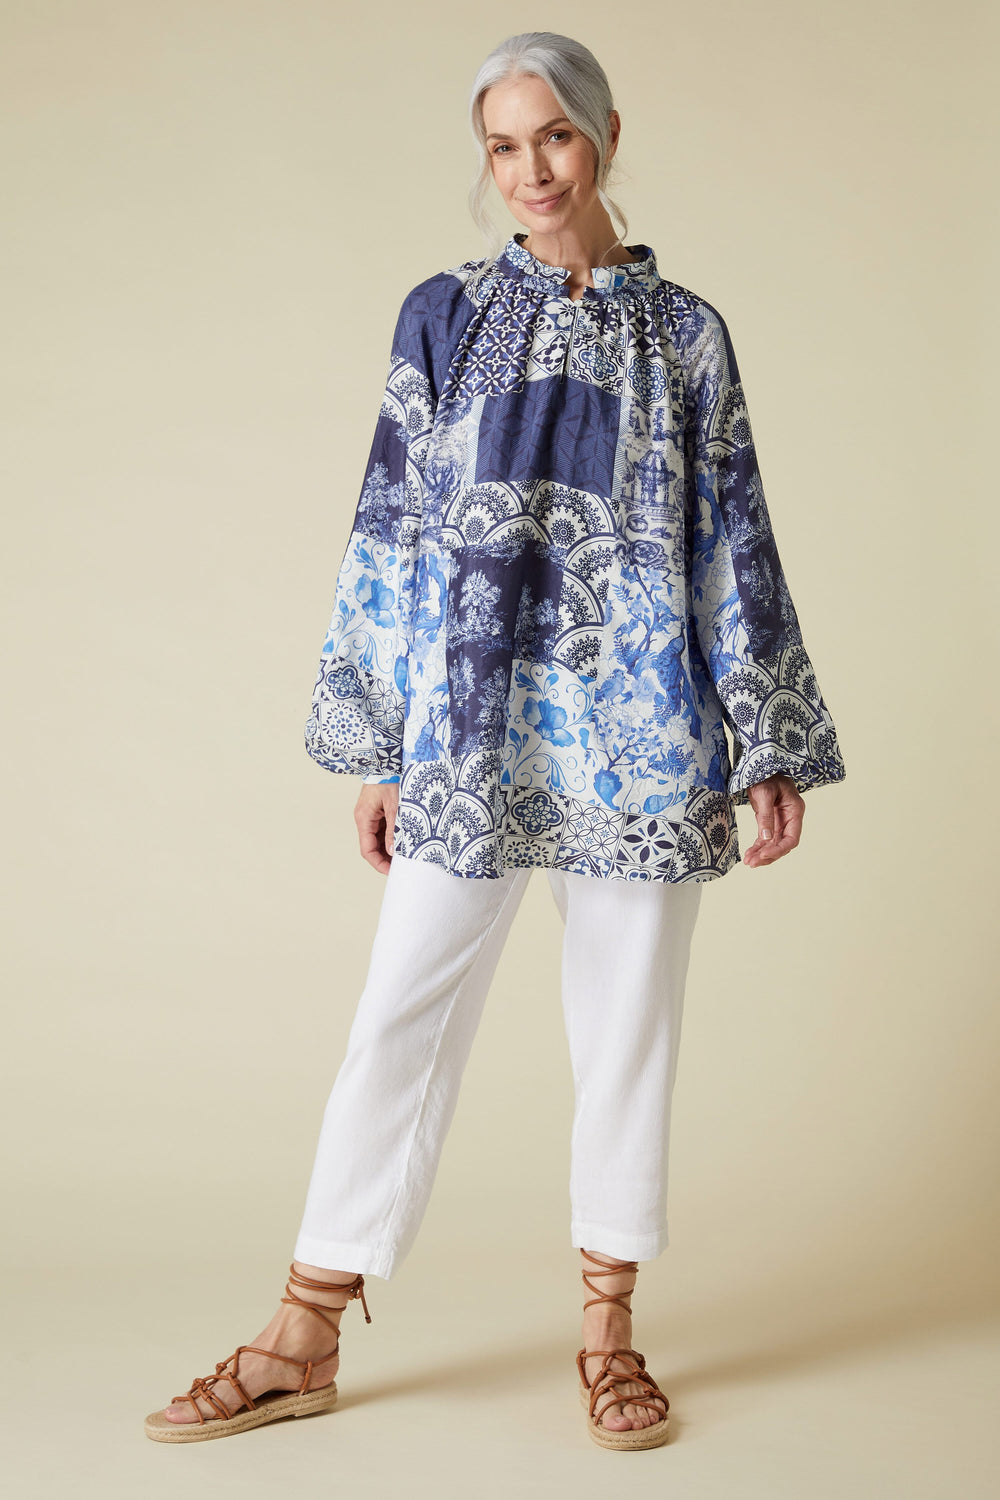 A woman posing in a Long Sleeve Porcelain Print Top featuring bell sleeves, styled with white pants and brown sandals.